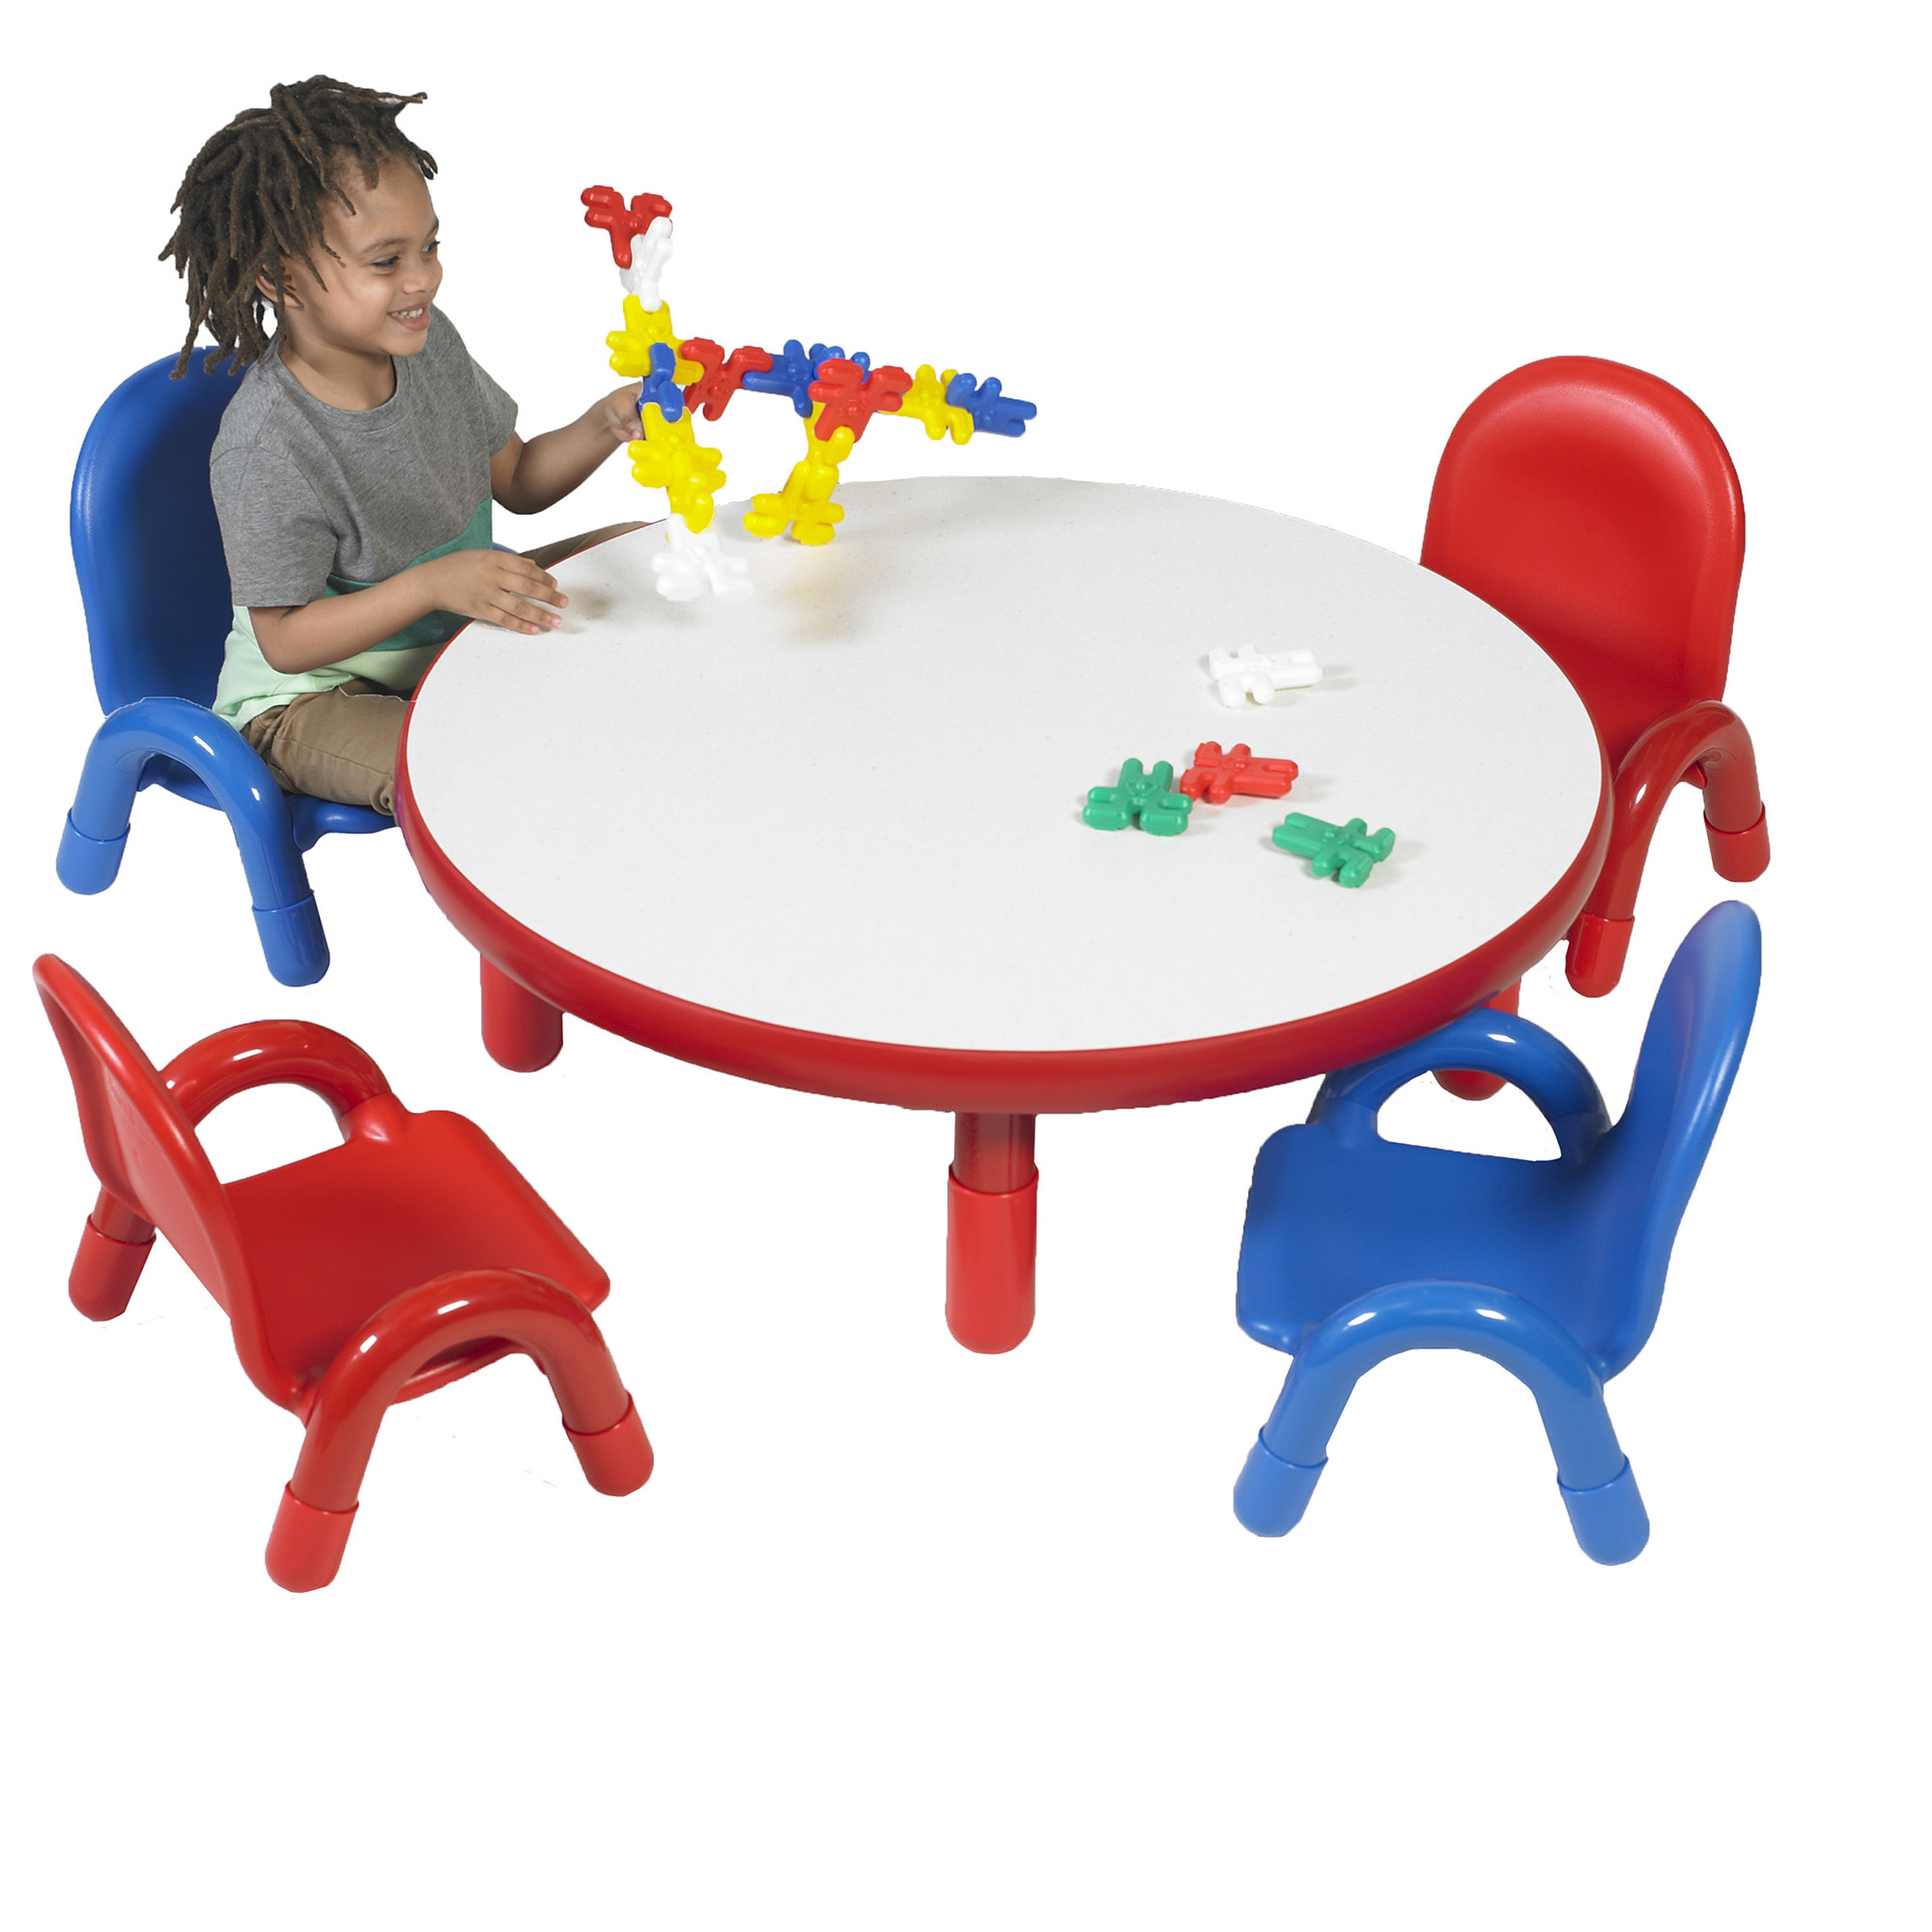 BaseLine® Toddler 91,5 cm  Diameter Round Table & Chair Set - Candy Apple Red